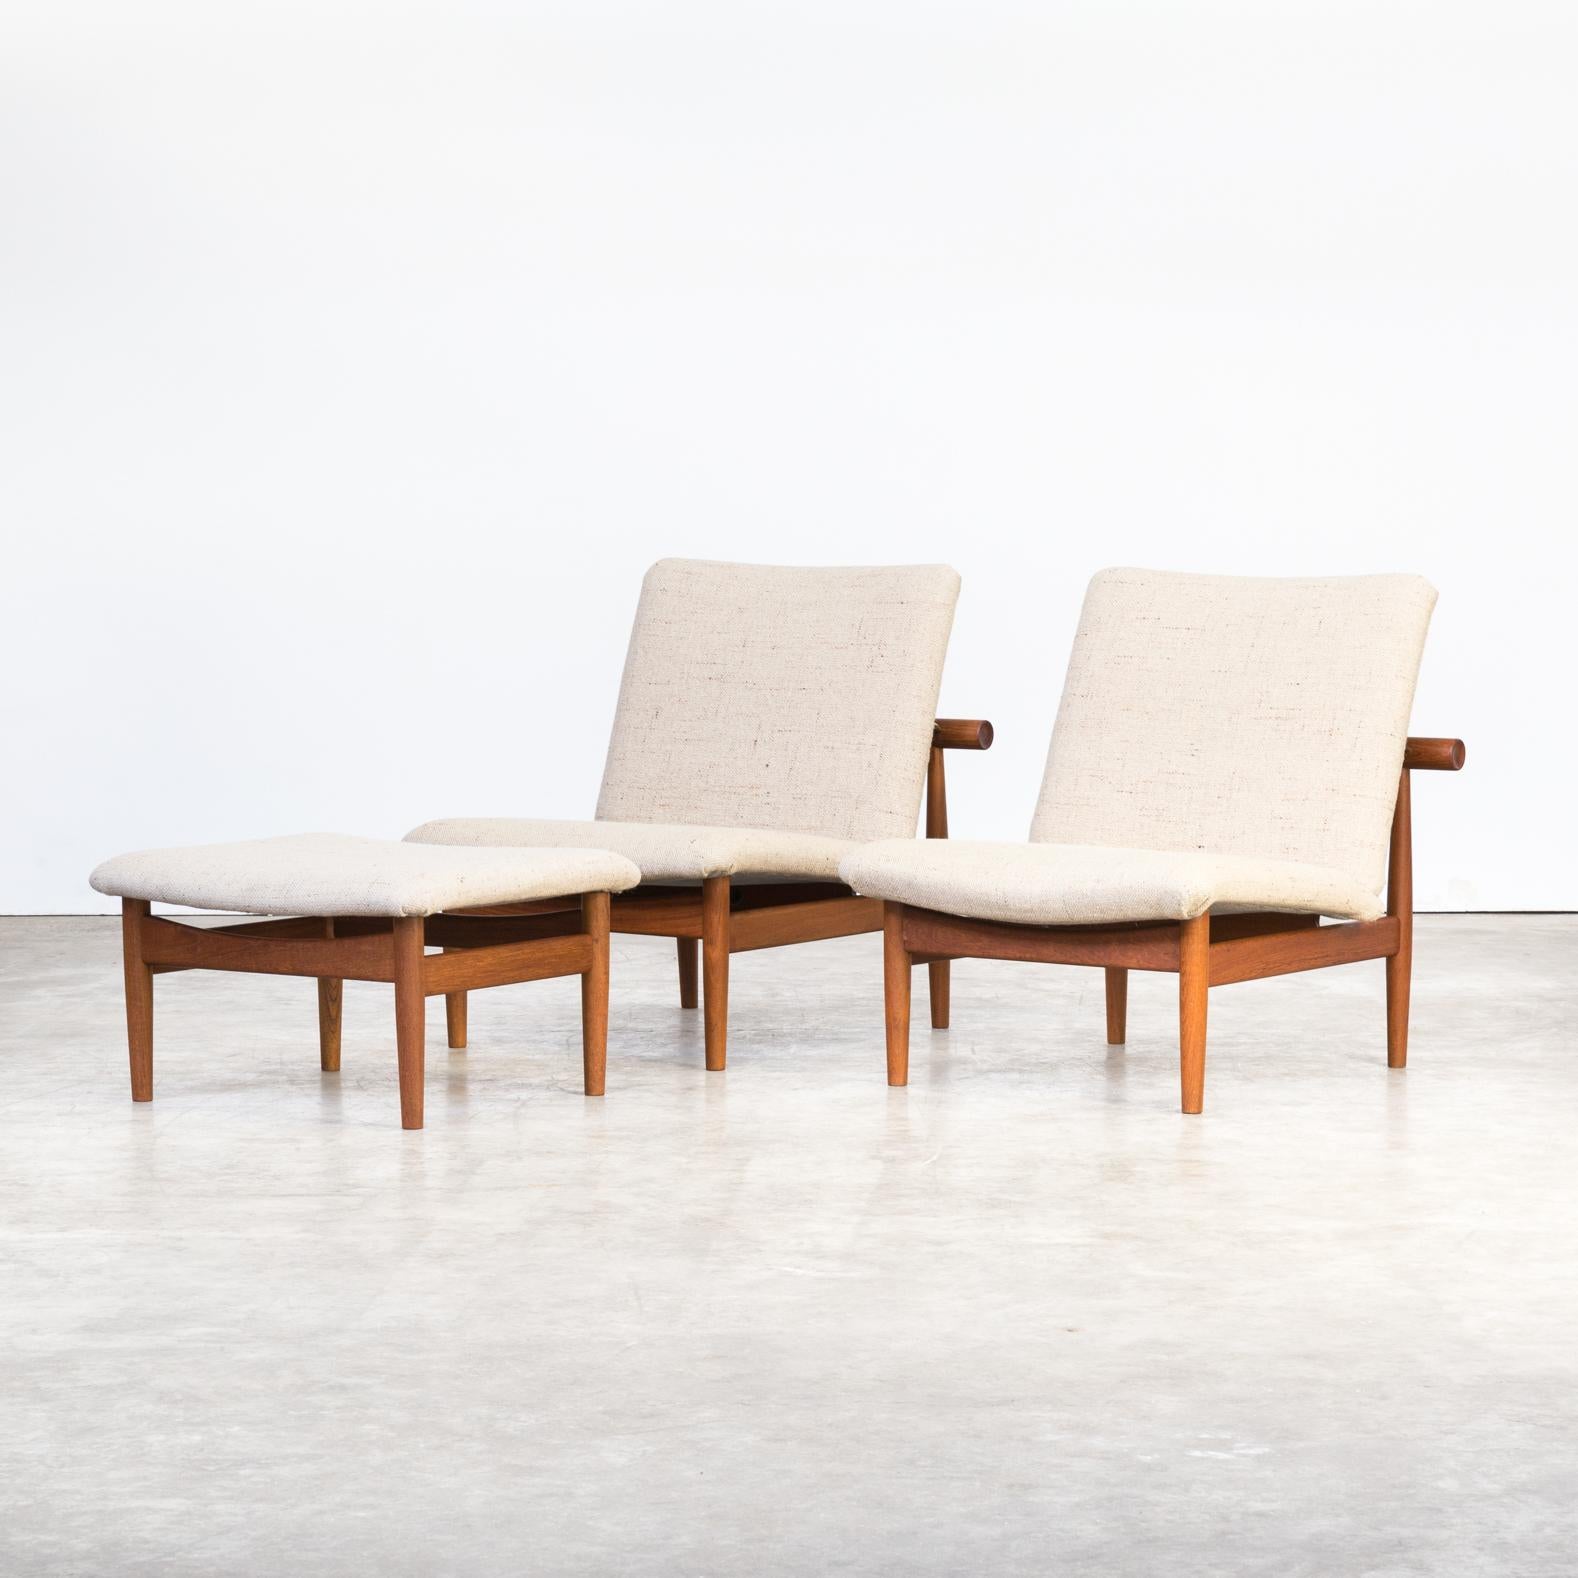 Finn Juhl’s model 137 ‘Japan’ chair was designed in 1953 for France & Søn. It’s teak frame takes inspiration from the Miyajima water gate in Hatsukaichi, Hiroshima, and Juhl considered it a low easy chair suited for reading & relaxing ideally.

As